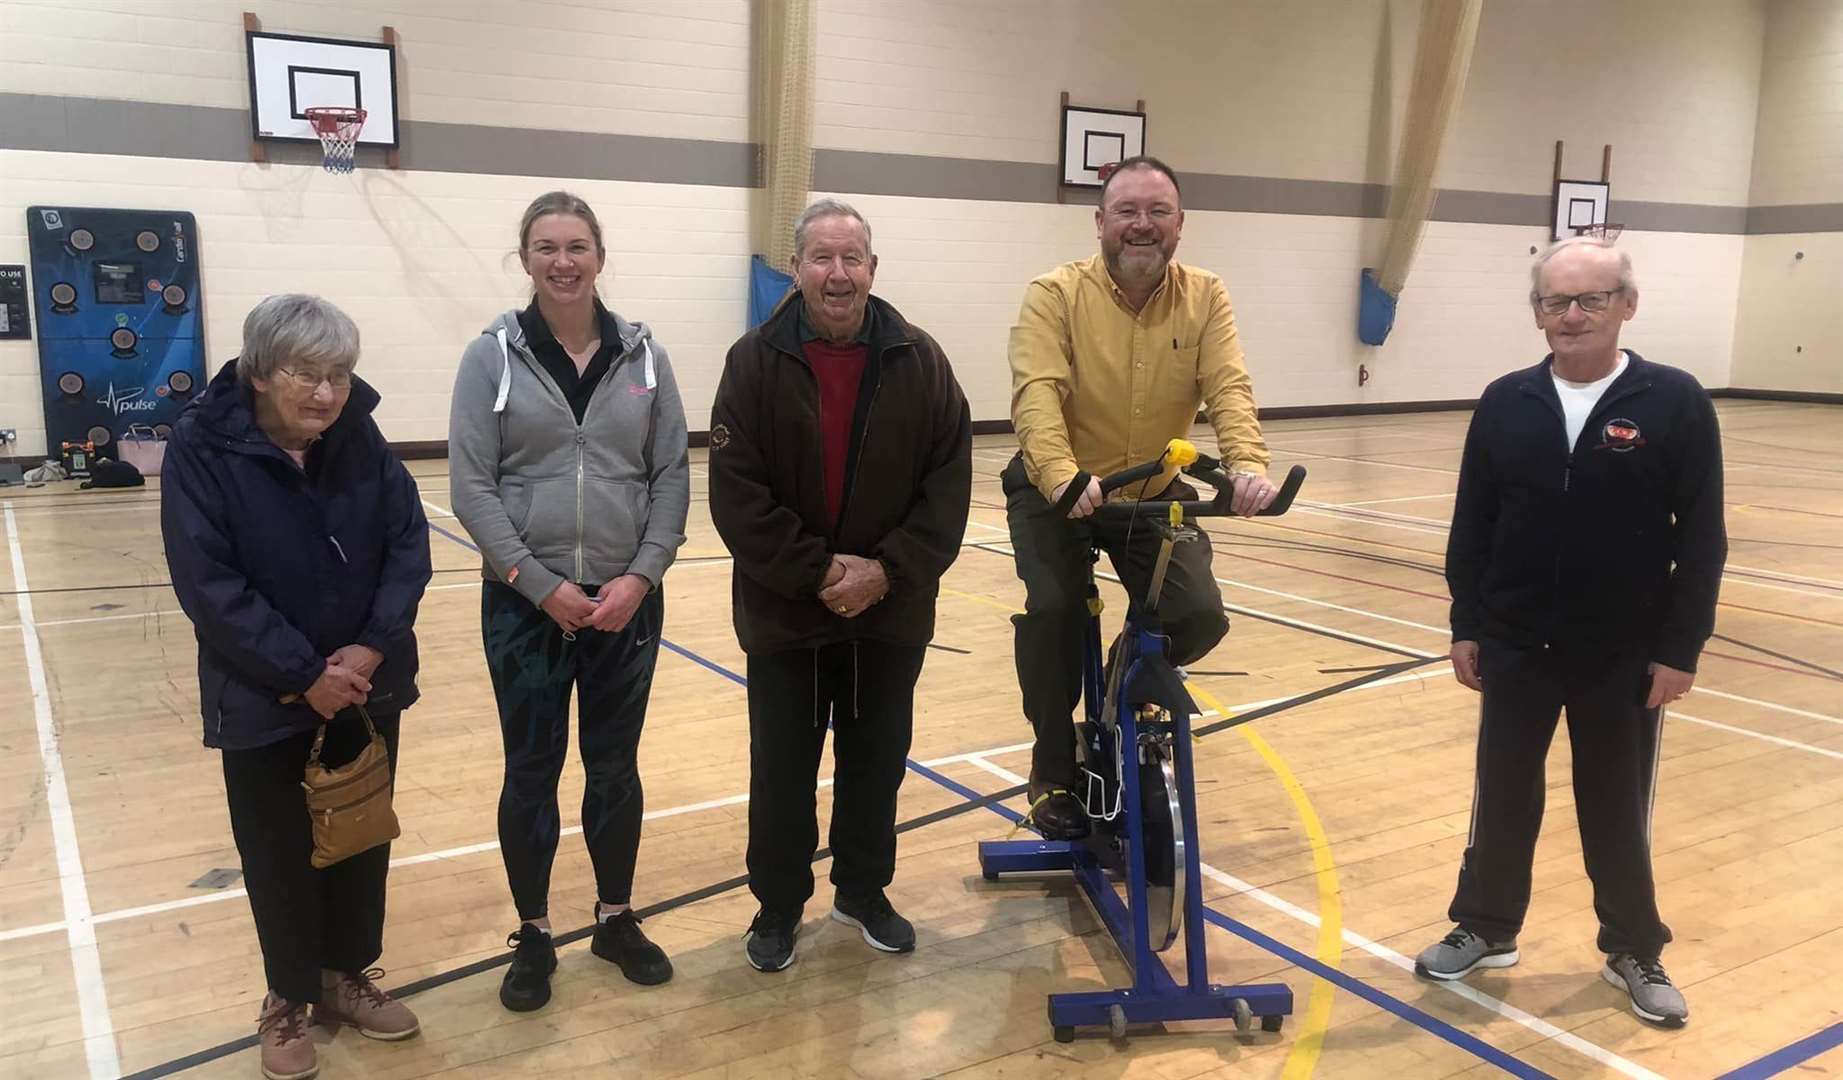 I met members of the GCRA at the Turriff Sports Center last week